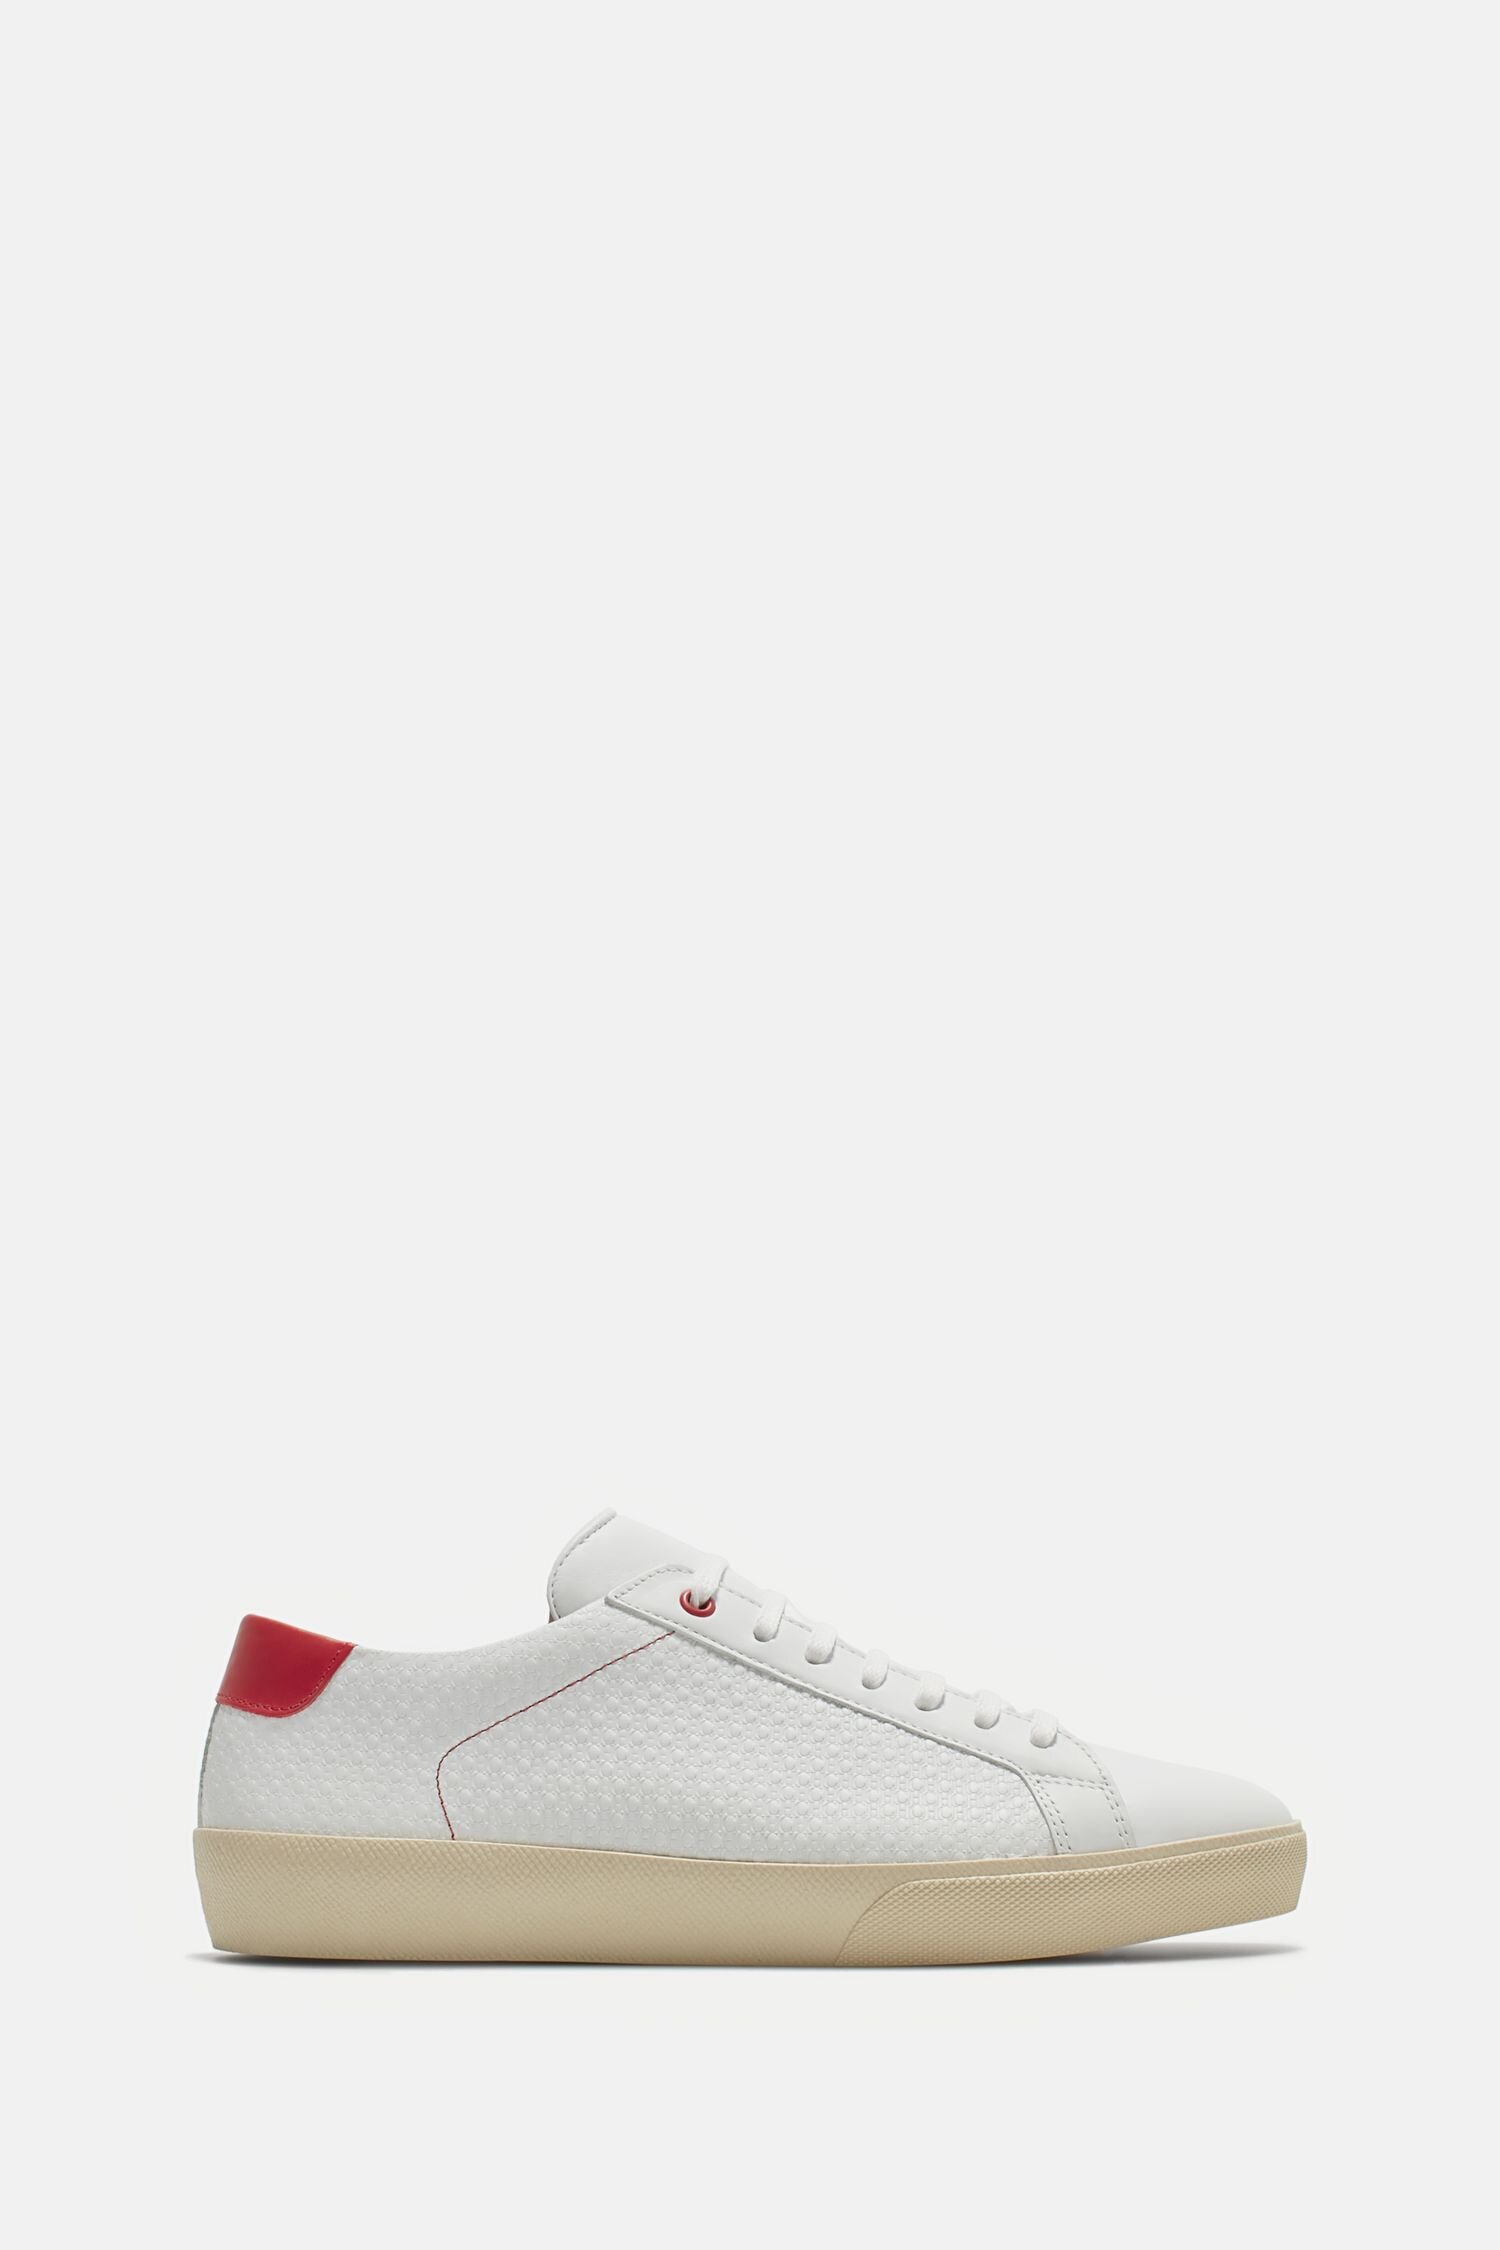 Carolina Herrera Embossed Leather Sneakers in White/Red — UFO No More